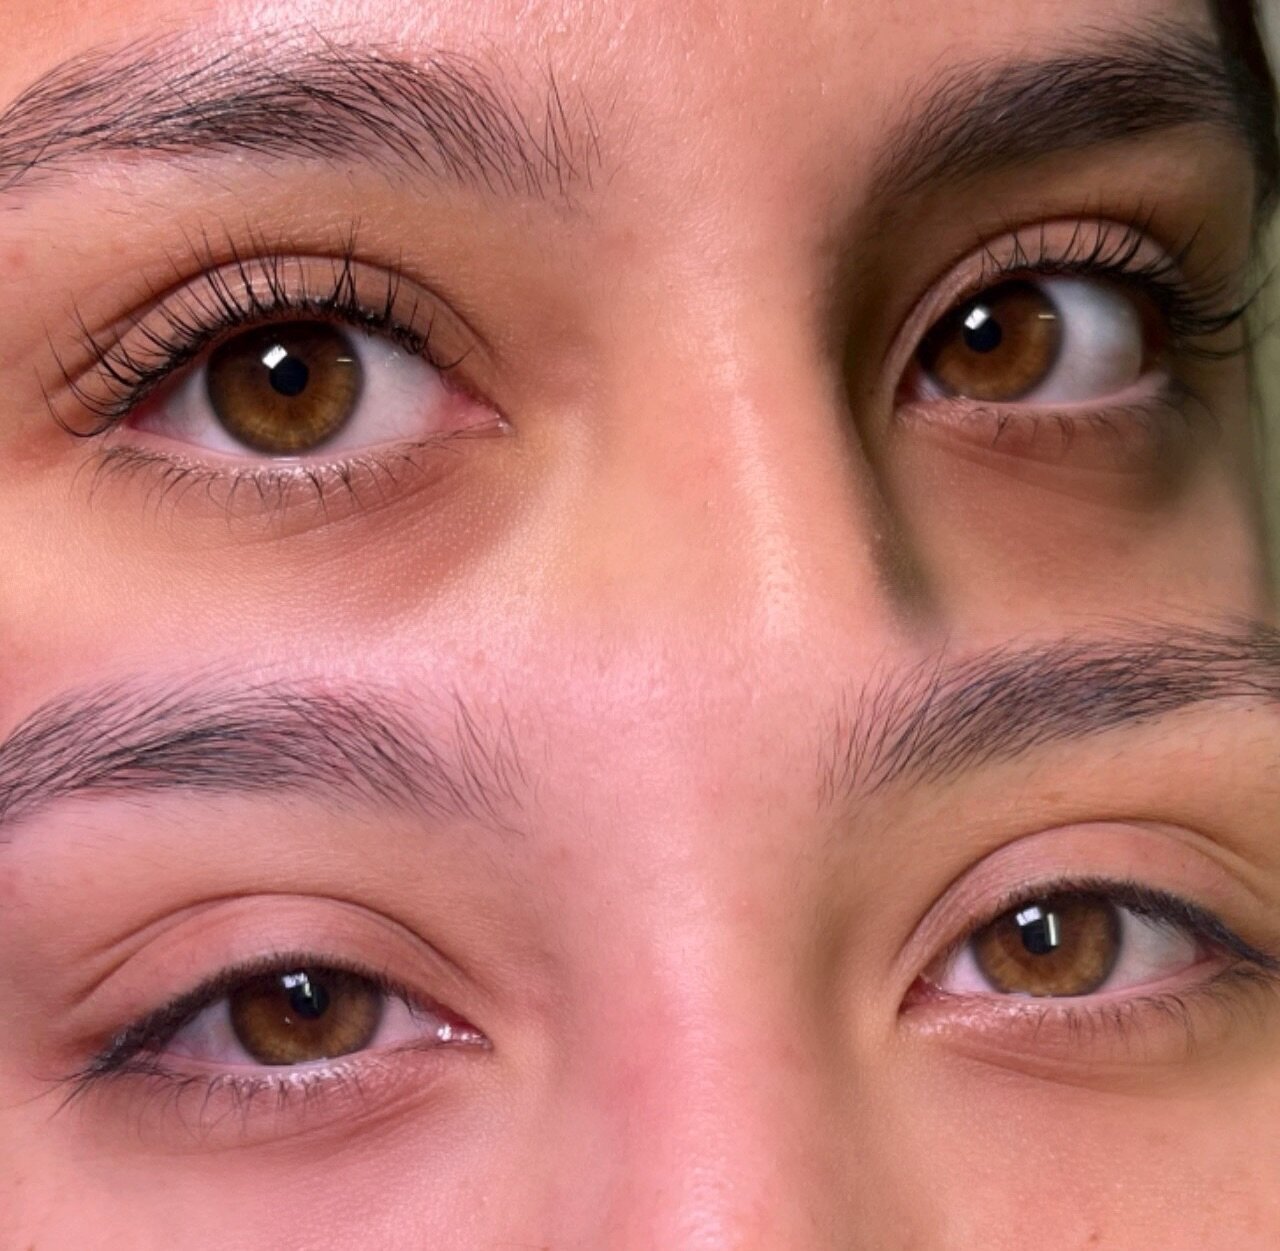 The gift of a lift! 🤗👀🤗
Completely changing the look of your eyes by accentuating the lashes and opening them up.

🩷Valentine&rsquo;s Day Sale 🩷

Lash Lift &amp; Tint $130

Full Sets 20% off

Brow Lamination $85

Valid Now through Feb. 14th 

FO